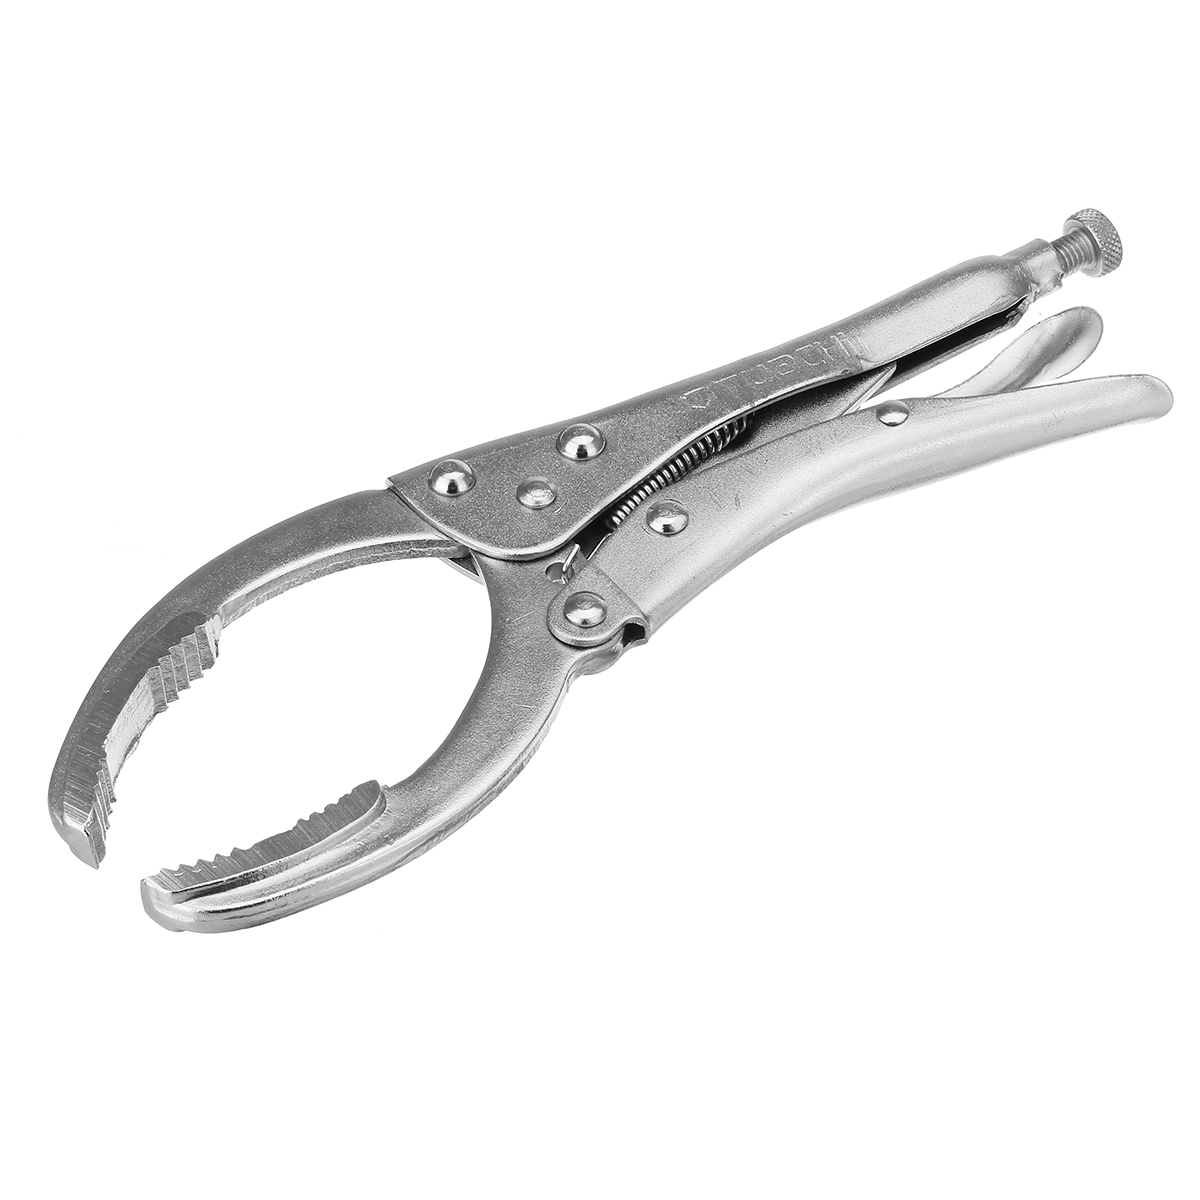 Self-Grip-Oil-Filter-Removal-Tool-Wrench-Pliers-Multi-Purpose-Hand-Remover-Tool-1446280-1